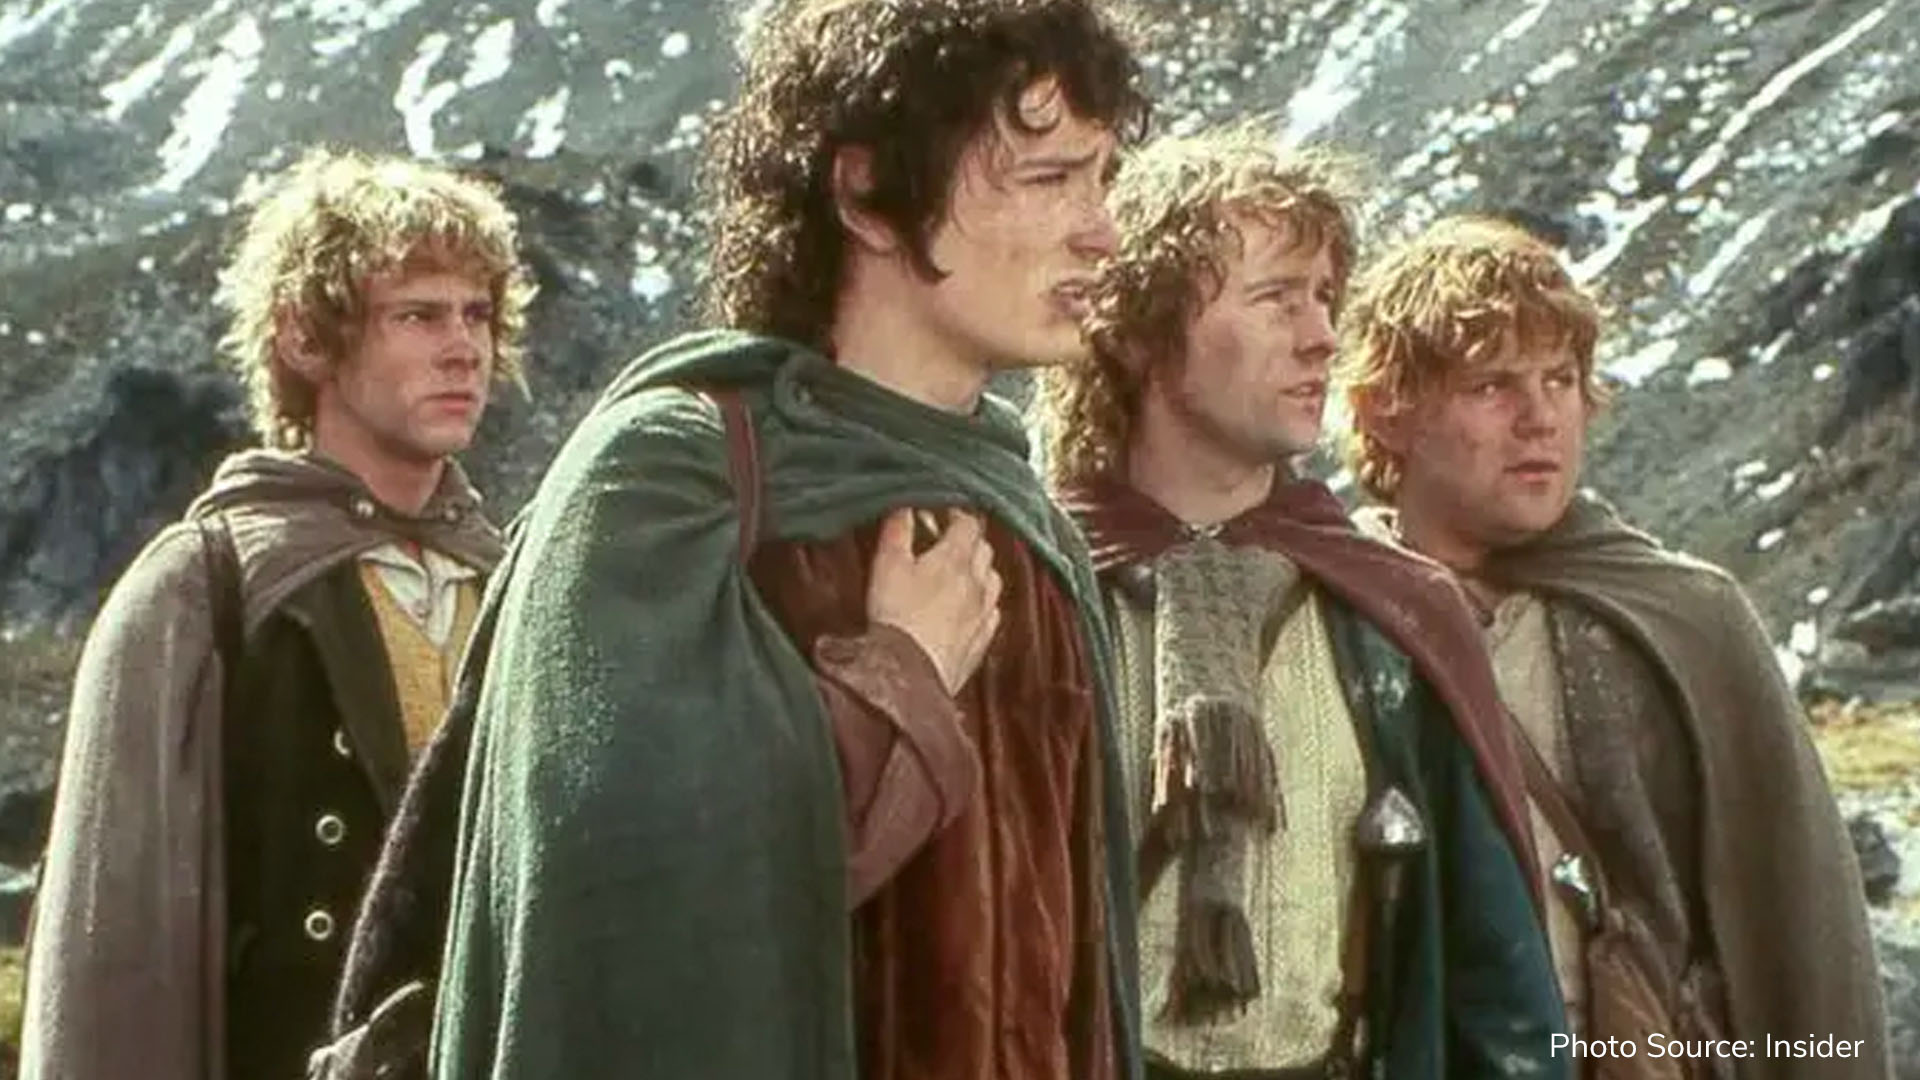 s 'Lord of the Rings' will cost at least $465 million